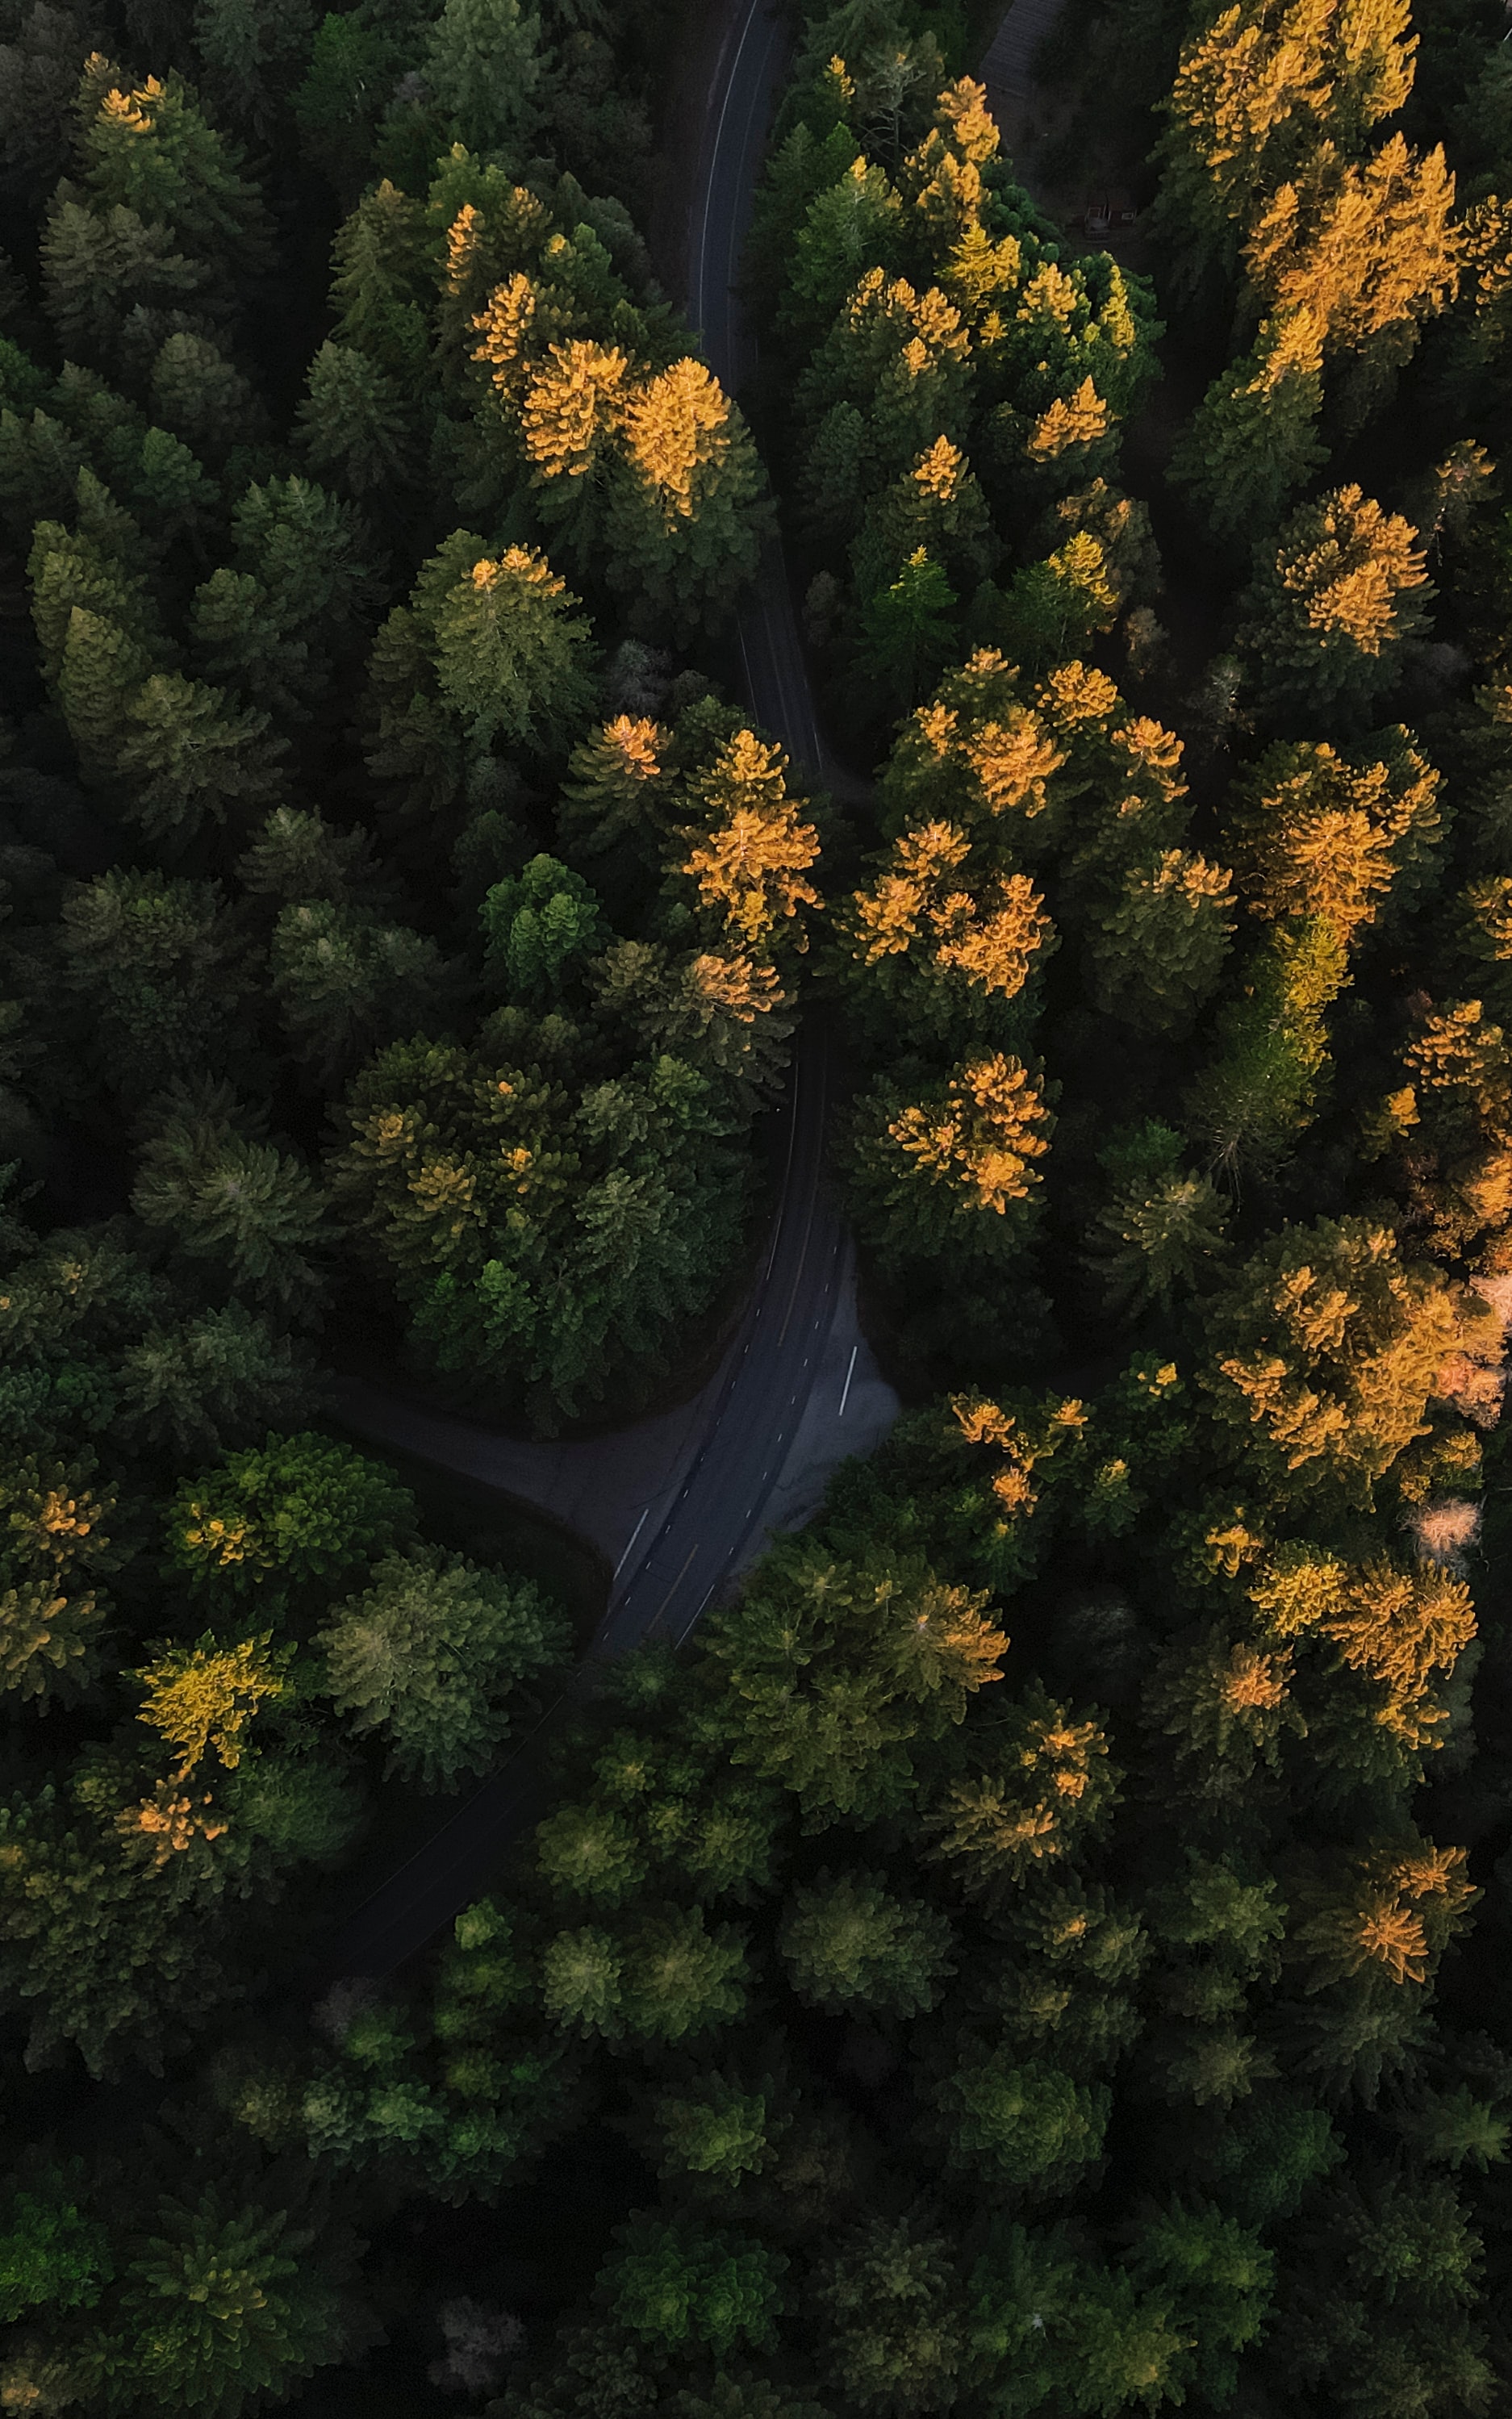 view from above, nature, trees, road, forest, winding, sinuous High Definition image